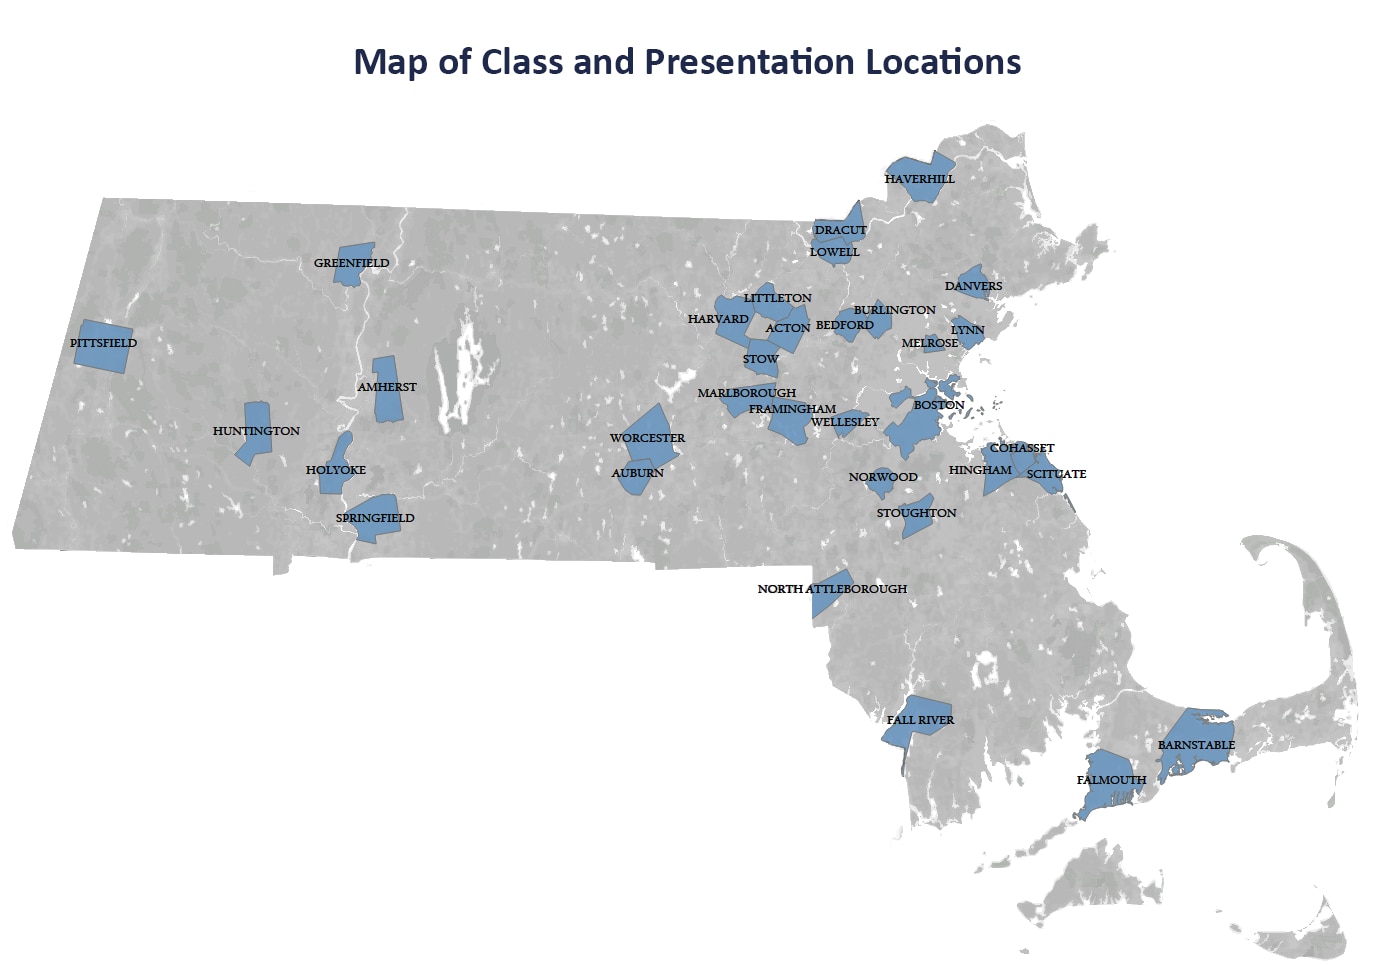 Map of class and presentation locations